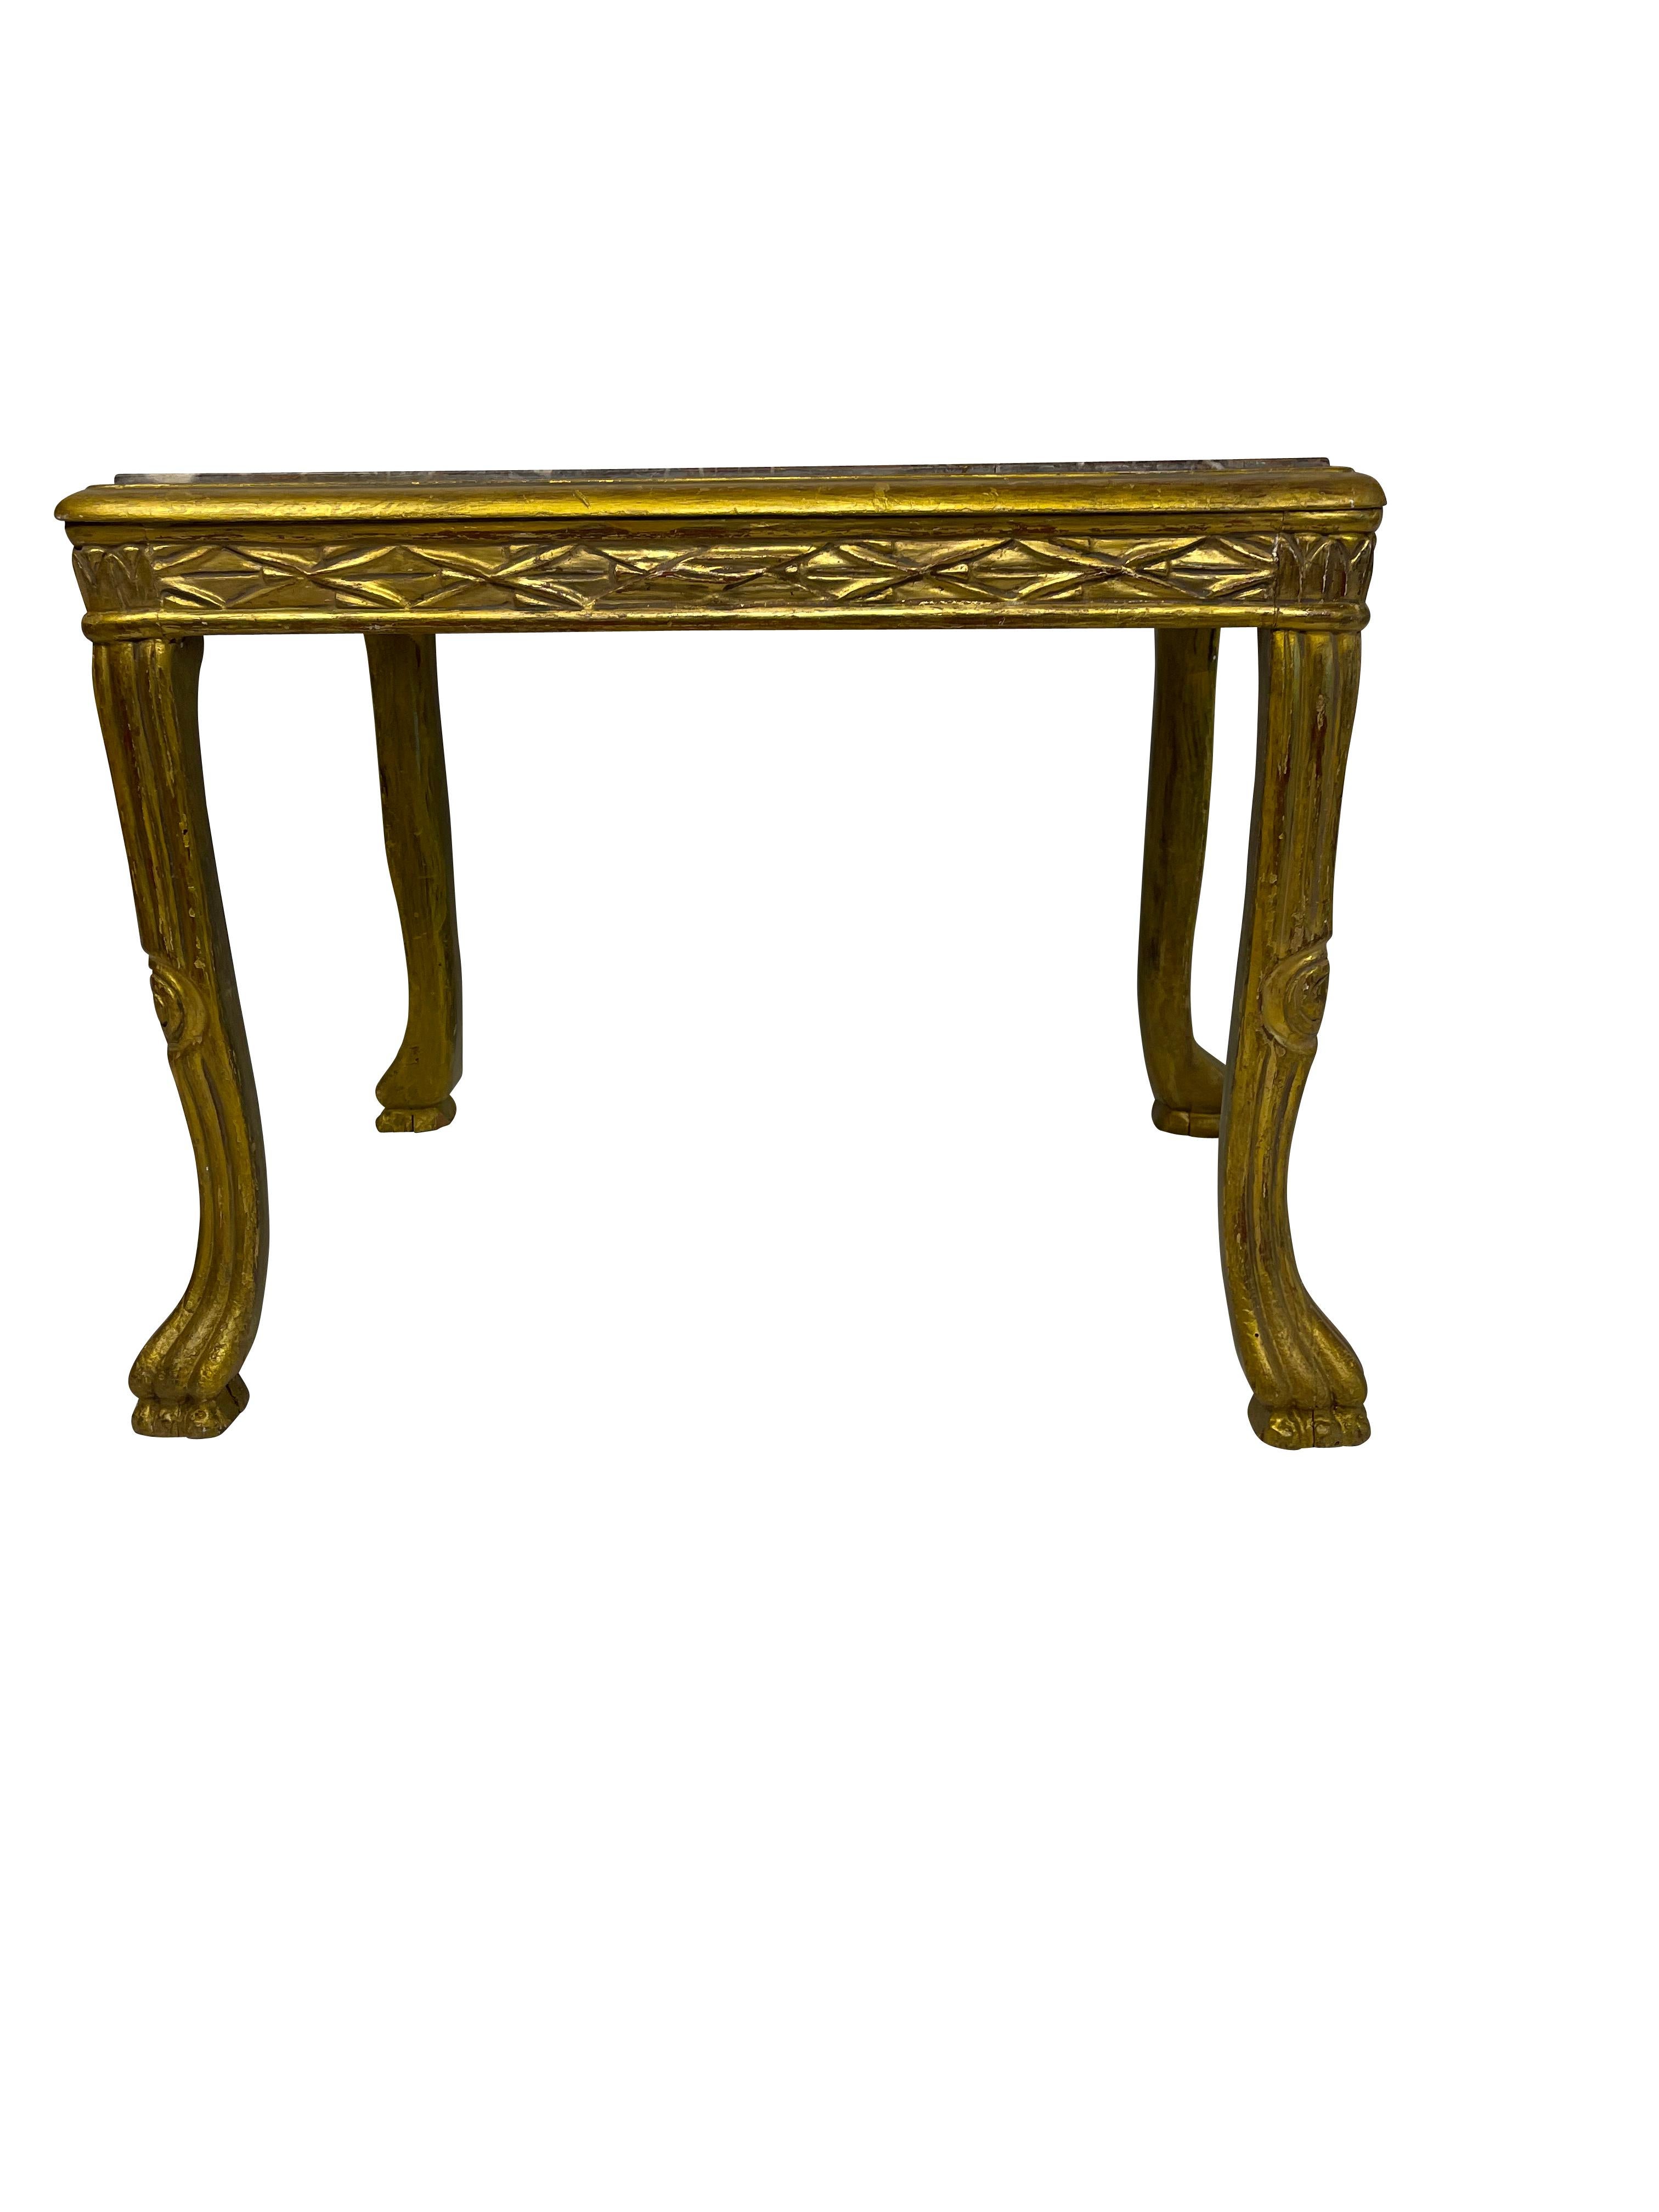 Highly decorative small Louis XV style gilt side table with grey marble top, carved legs ending in paw feet with extensive carving throughout.
Measures: 20 1/2